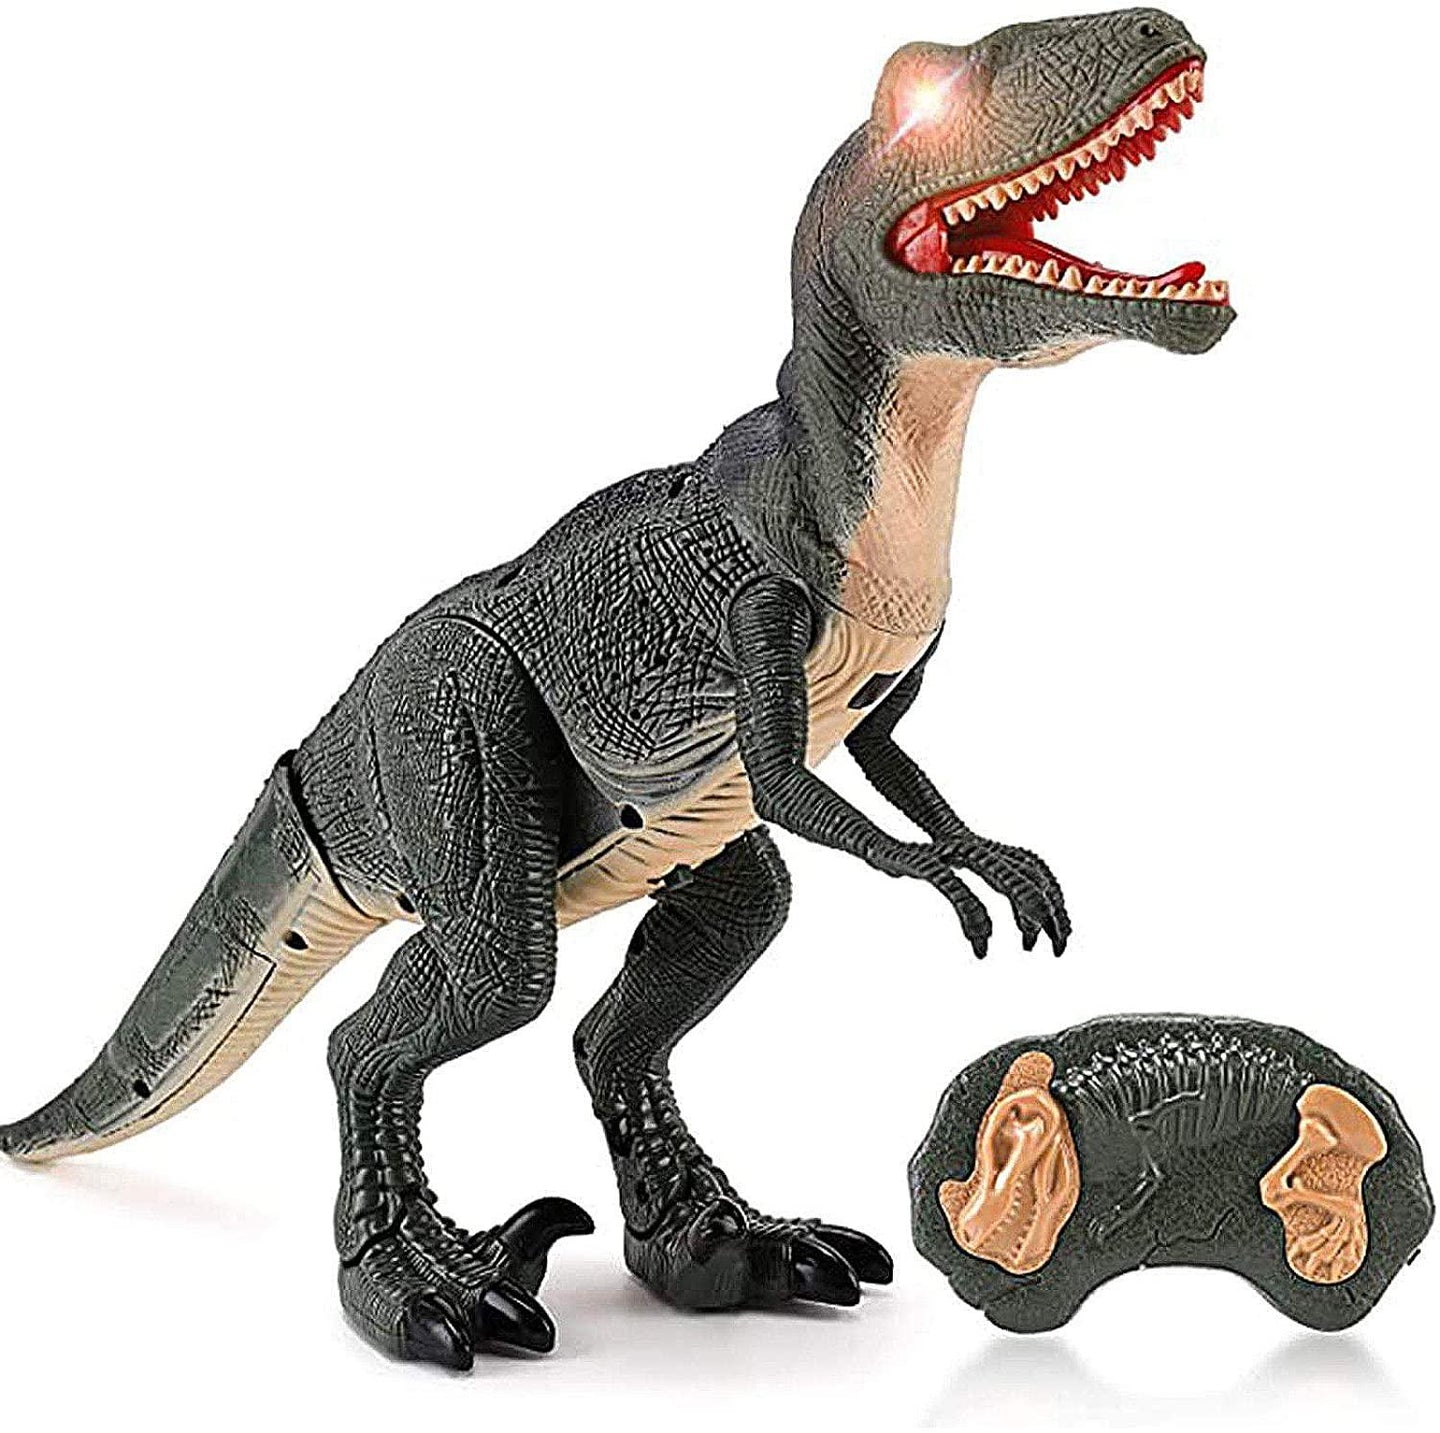 Remote Control R C Walking Dinosaur Toy With Shaking Head,Light Up Eyes & Sounds ,Velociraptor,Gift For Kids Amazon Platform Banned - Curtis & Ivory